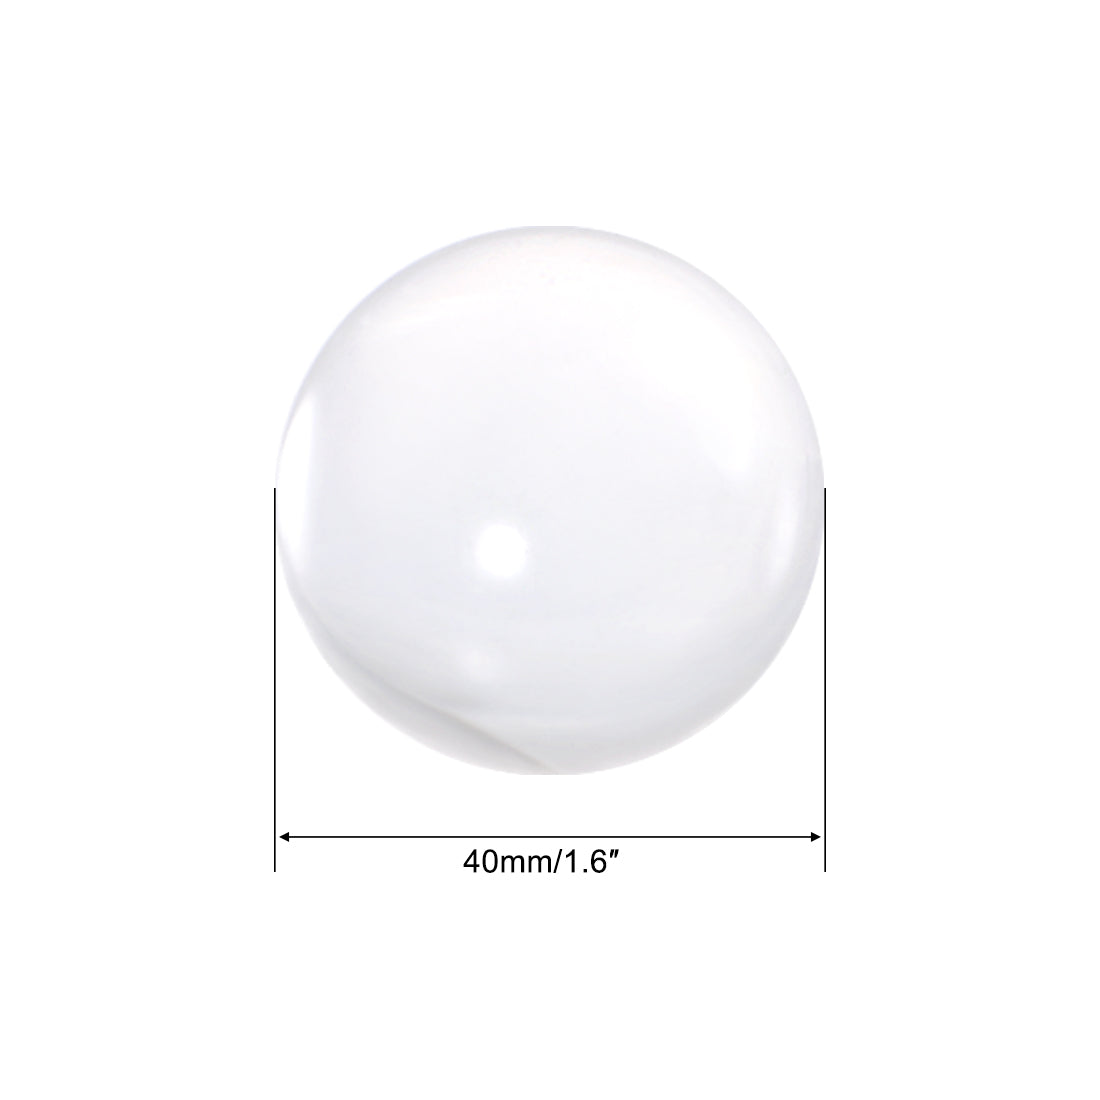 Uxcell Uxcell 35mm Diameter Acrylic Ball Clear/Transparent Sphere Ornament 1.4 Inches 5 Pcs